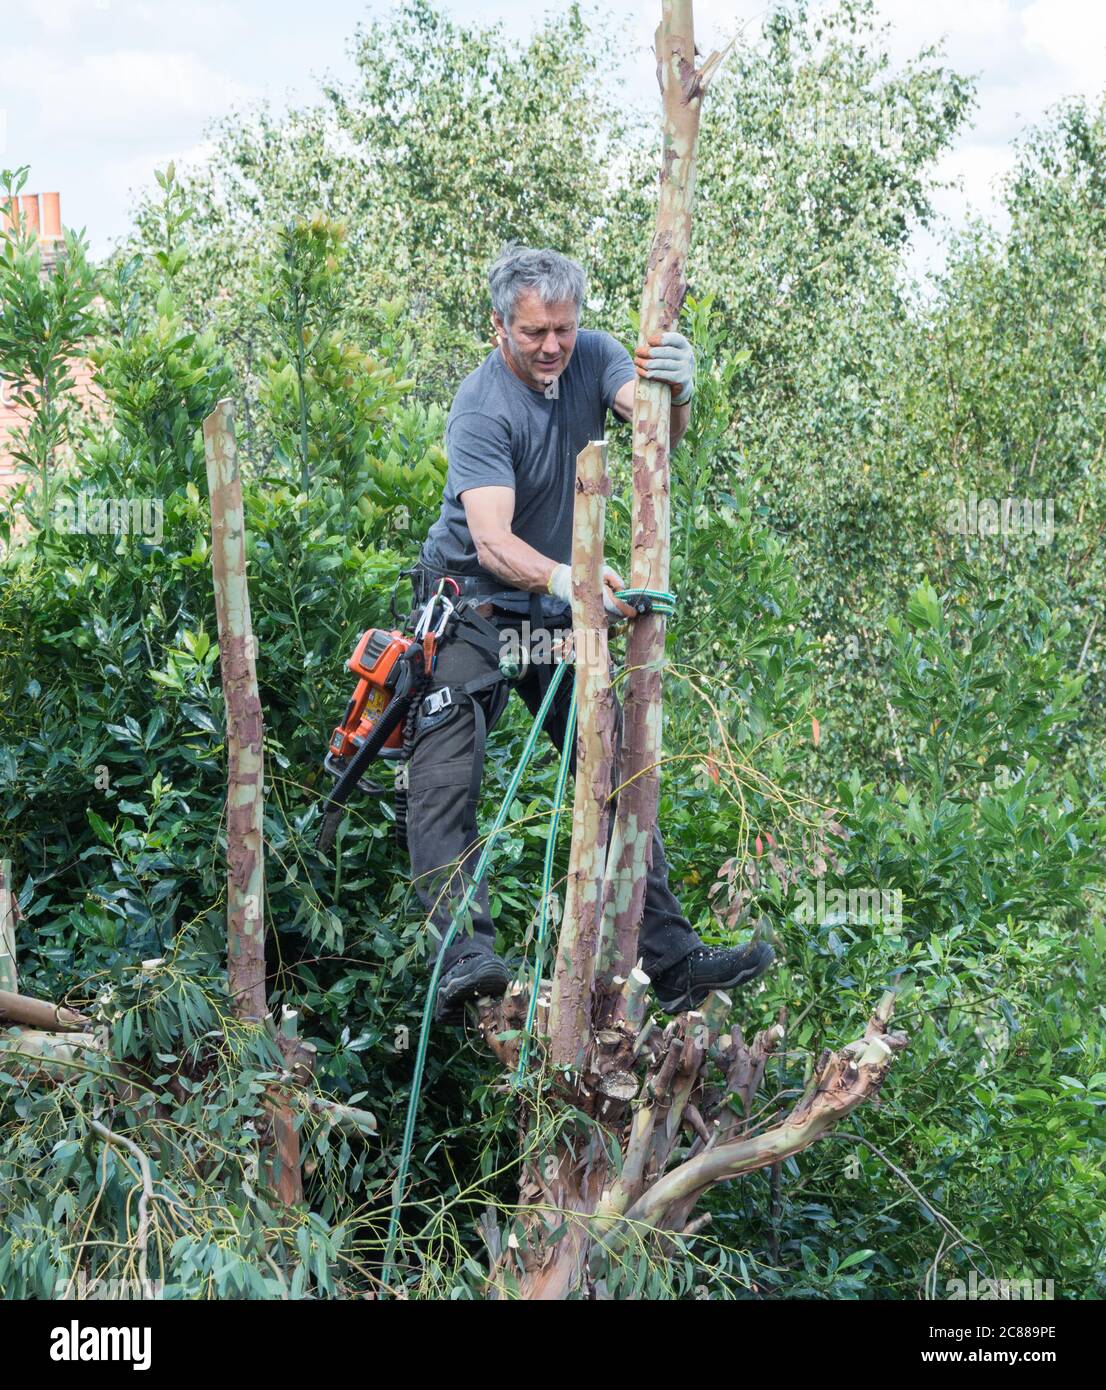 A tree surgeon going about his work in a suburban garden, London, UK Stock Photo